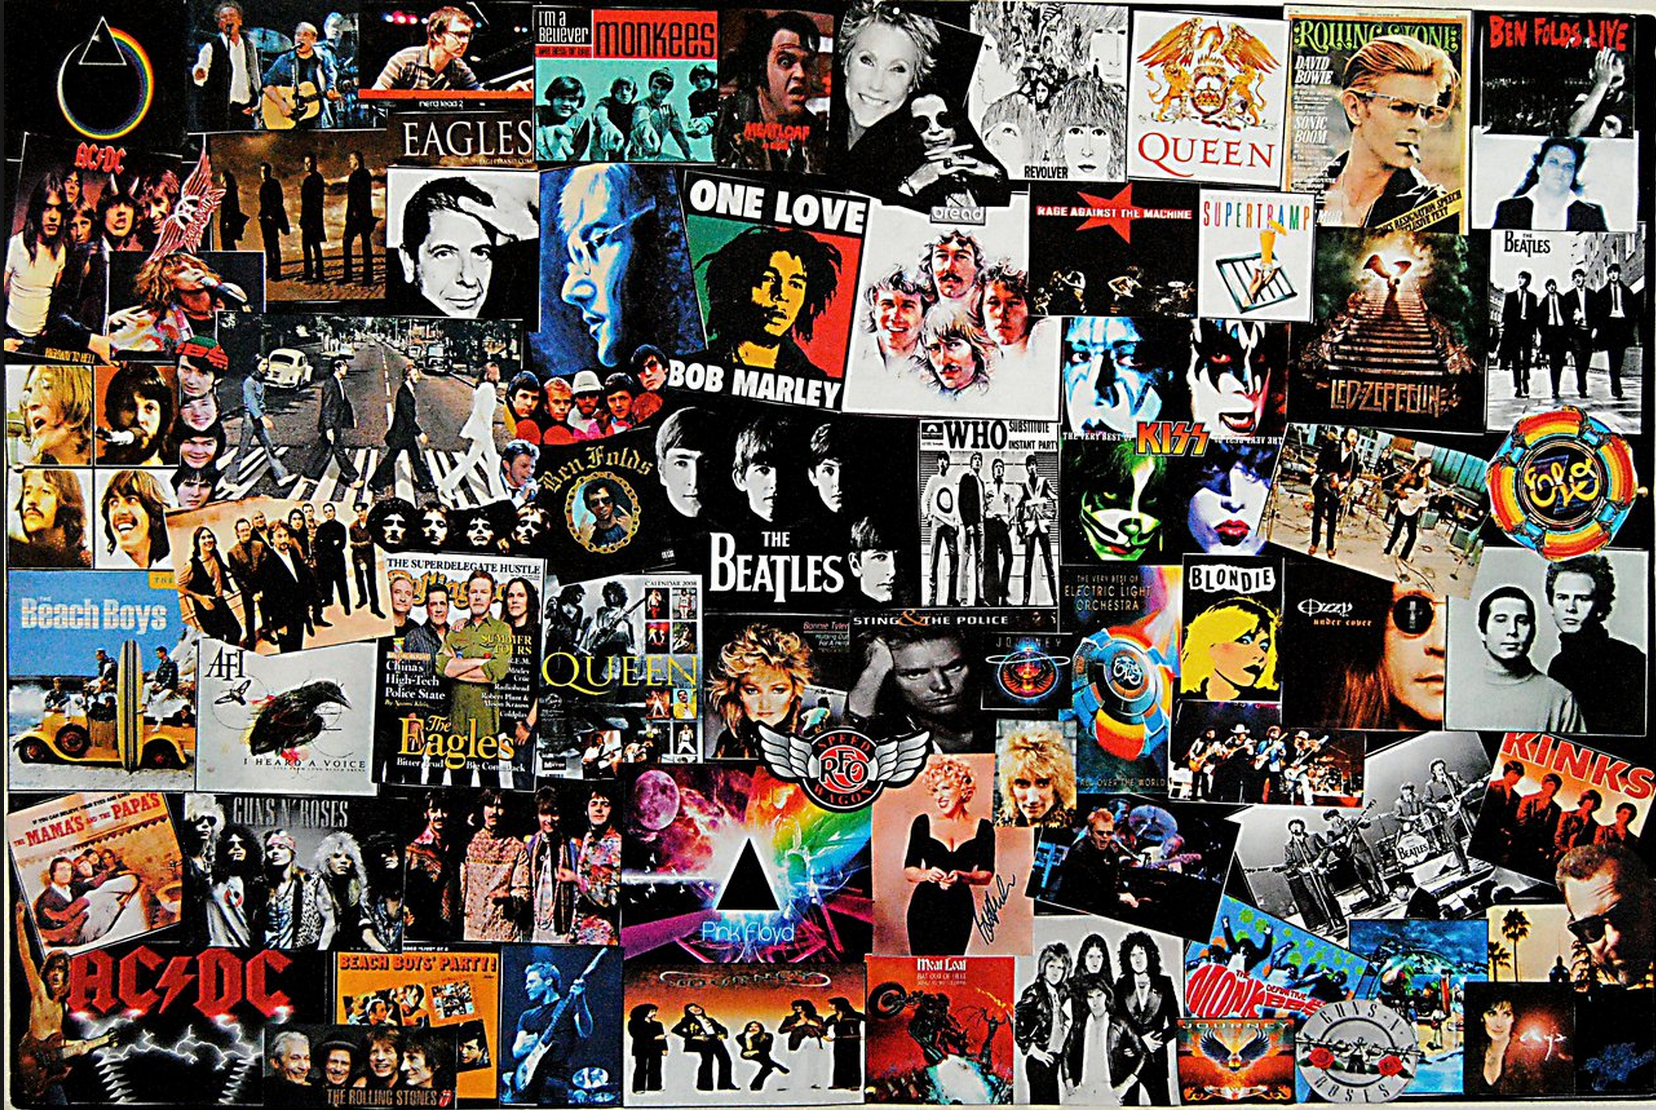 Grunge Aesthetic Wall Collage 42 Collage Of Great Albums